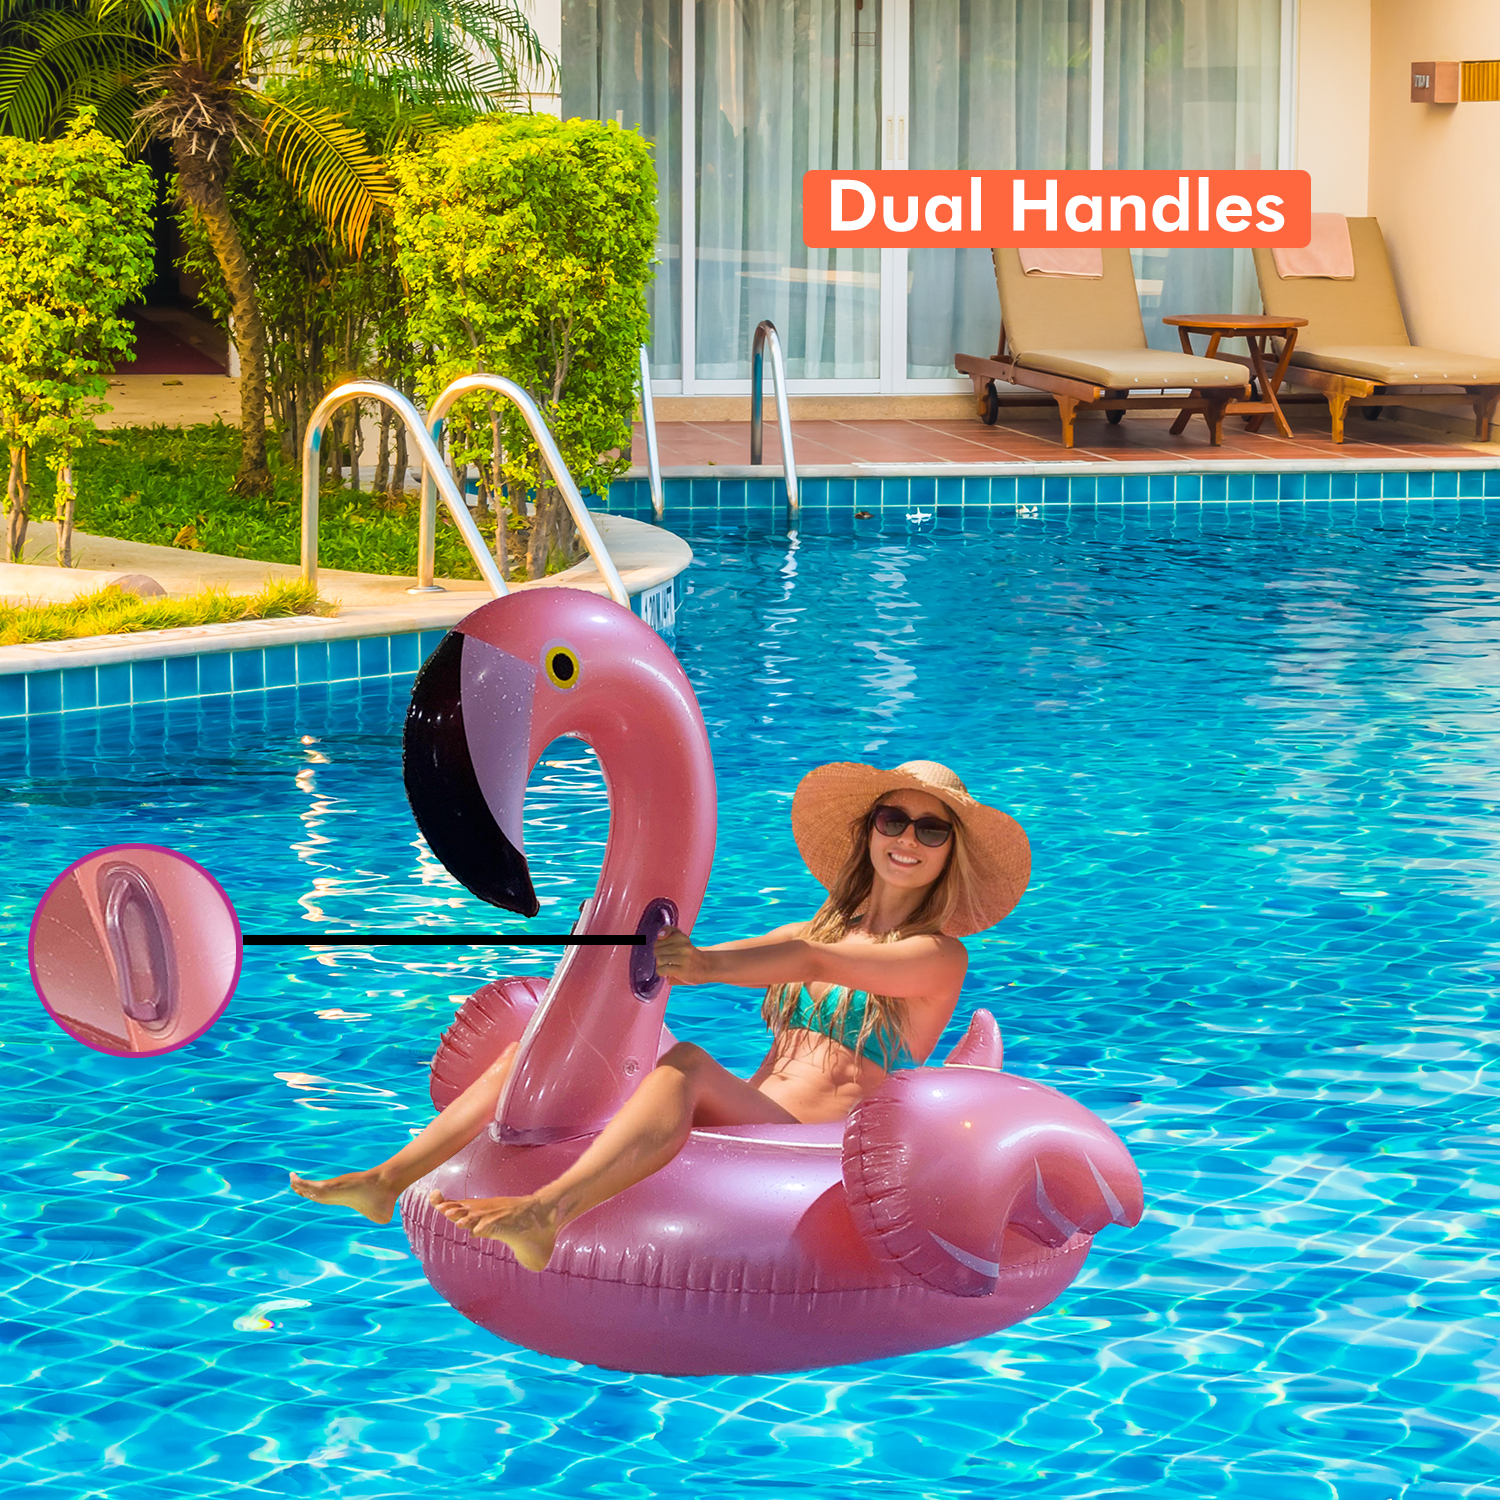 Dimple Giant Inflatable Luxurious Flamingo Pool Float Toy 60x60x34 Inches, Fun Beach Floaties, Swim Party Toys For Adults & Kids (Rose Gold)